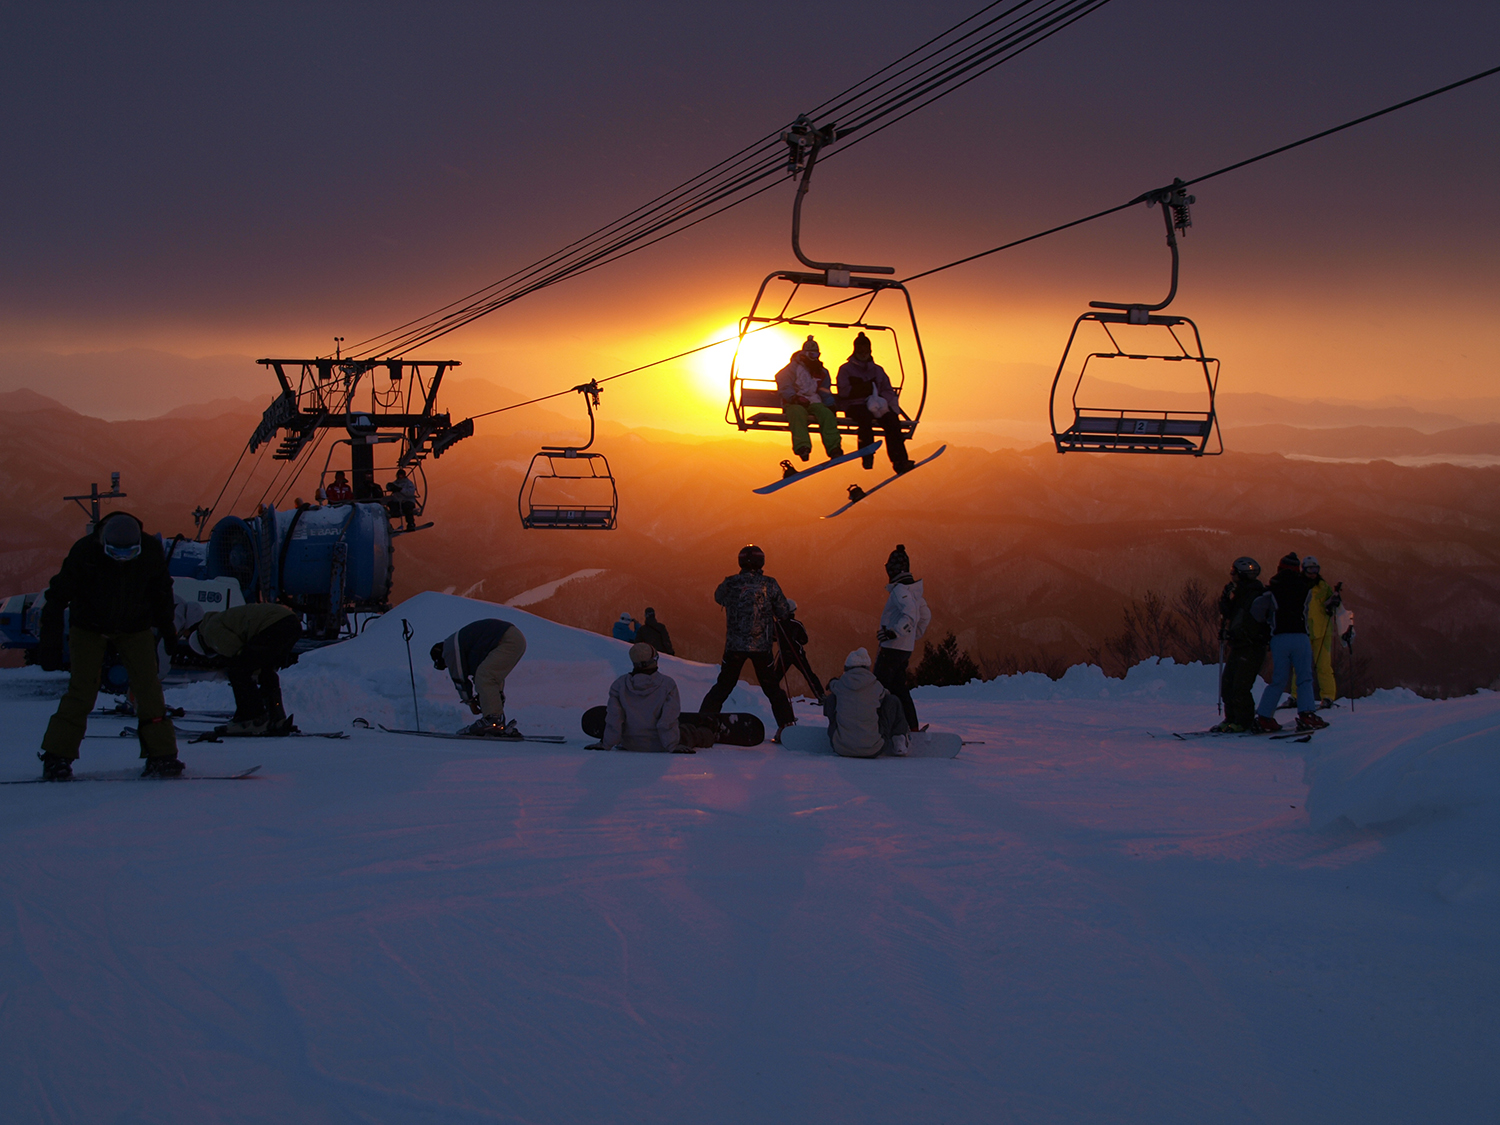 A luxurious event to glide on the long slopes of the Risen Slalom course while bathing in the morning sun!